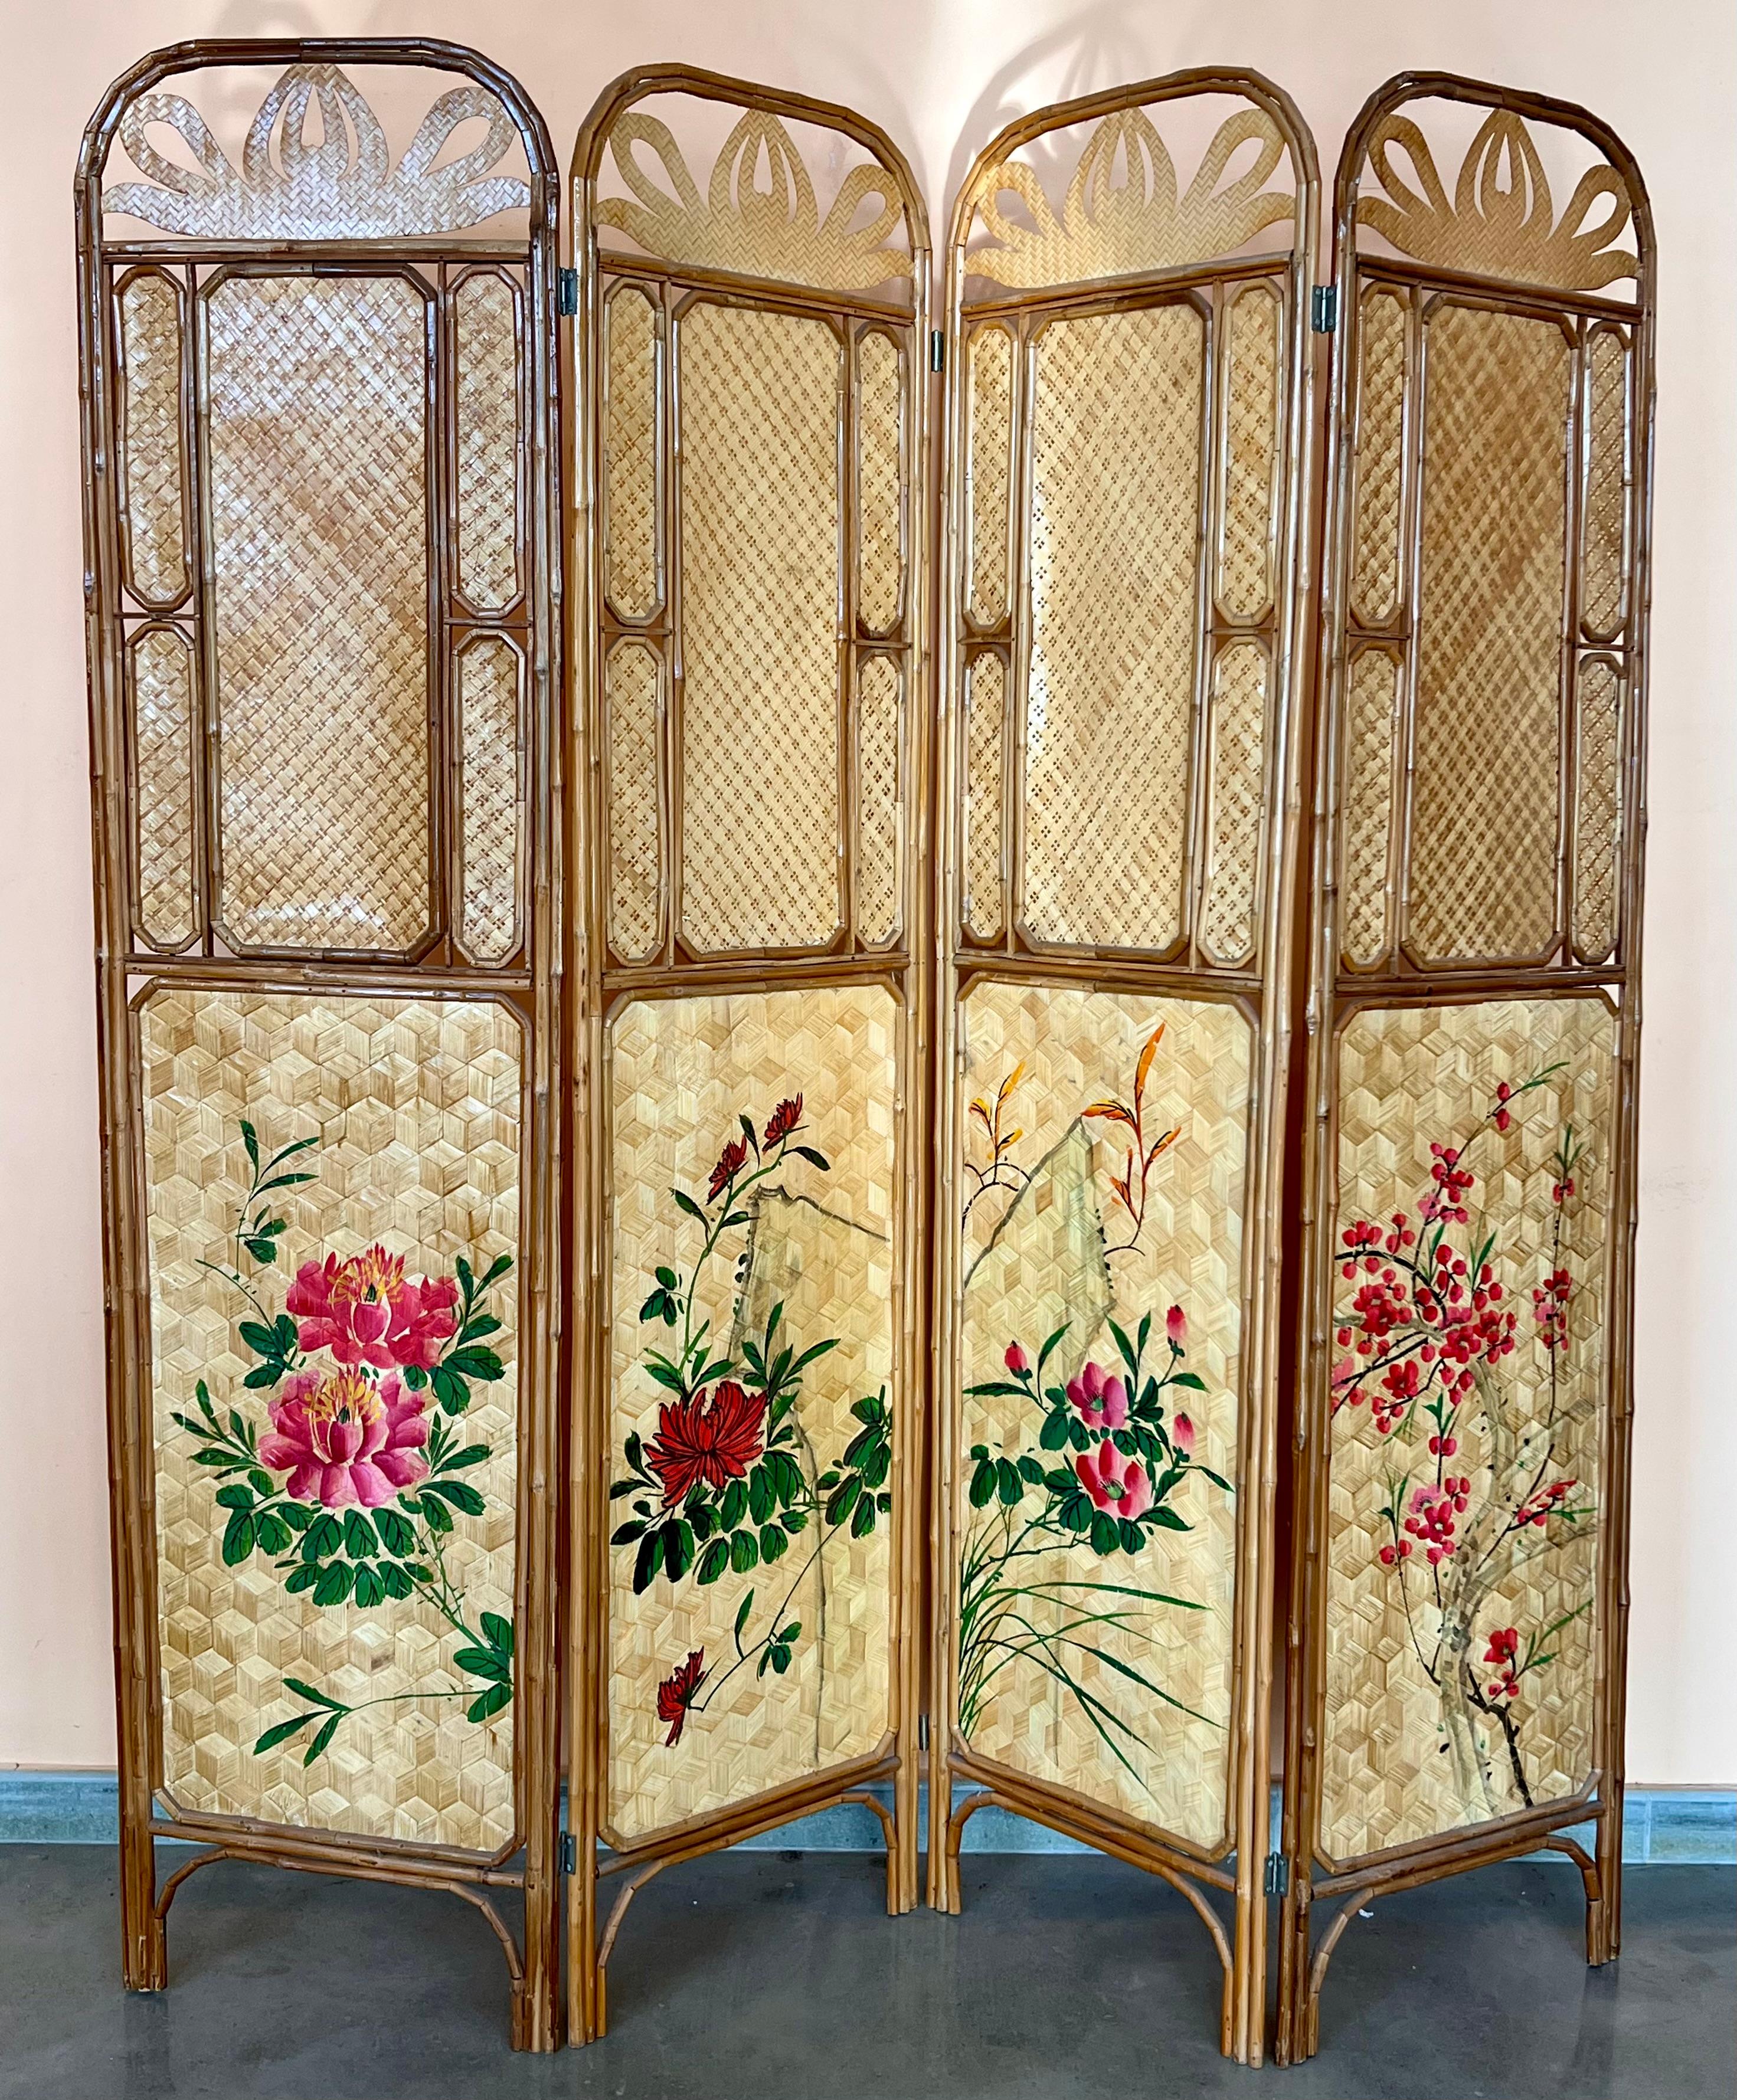 This is a beautiful and rare wooden four-panel folding screen with hand painting en both sides, circa 1960.   Beautiful four-panel screen, room divider, framing with intricately carved geometric design medallions in wood and negative space.  Very